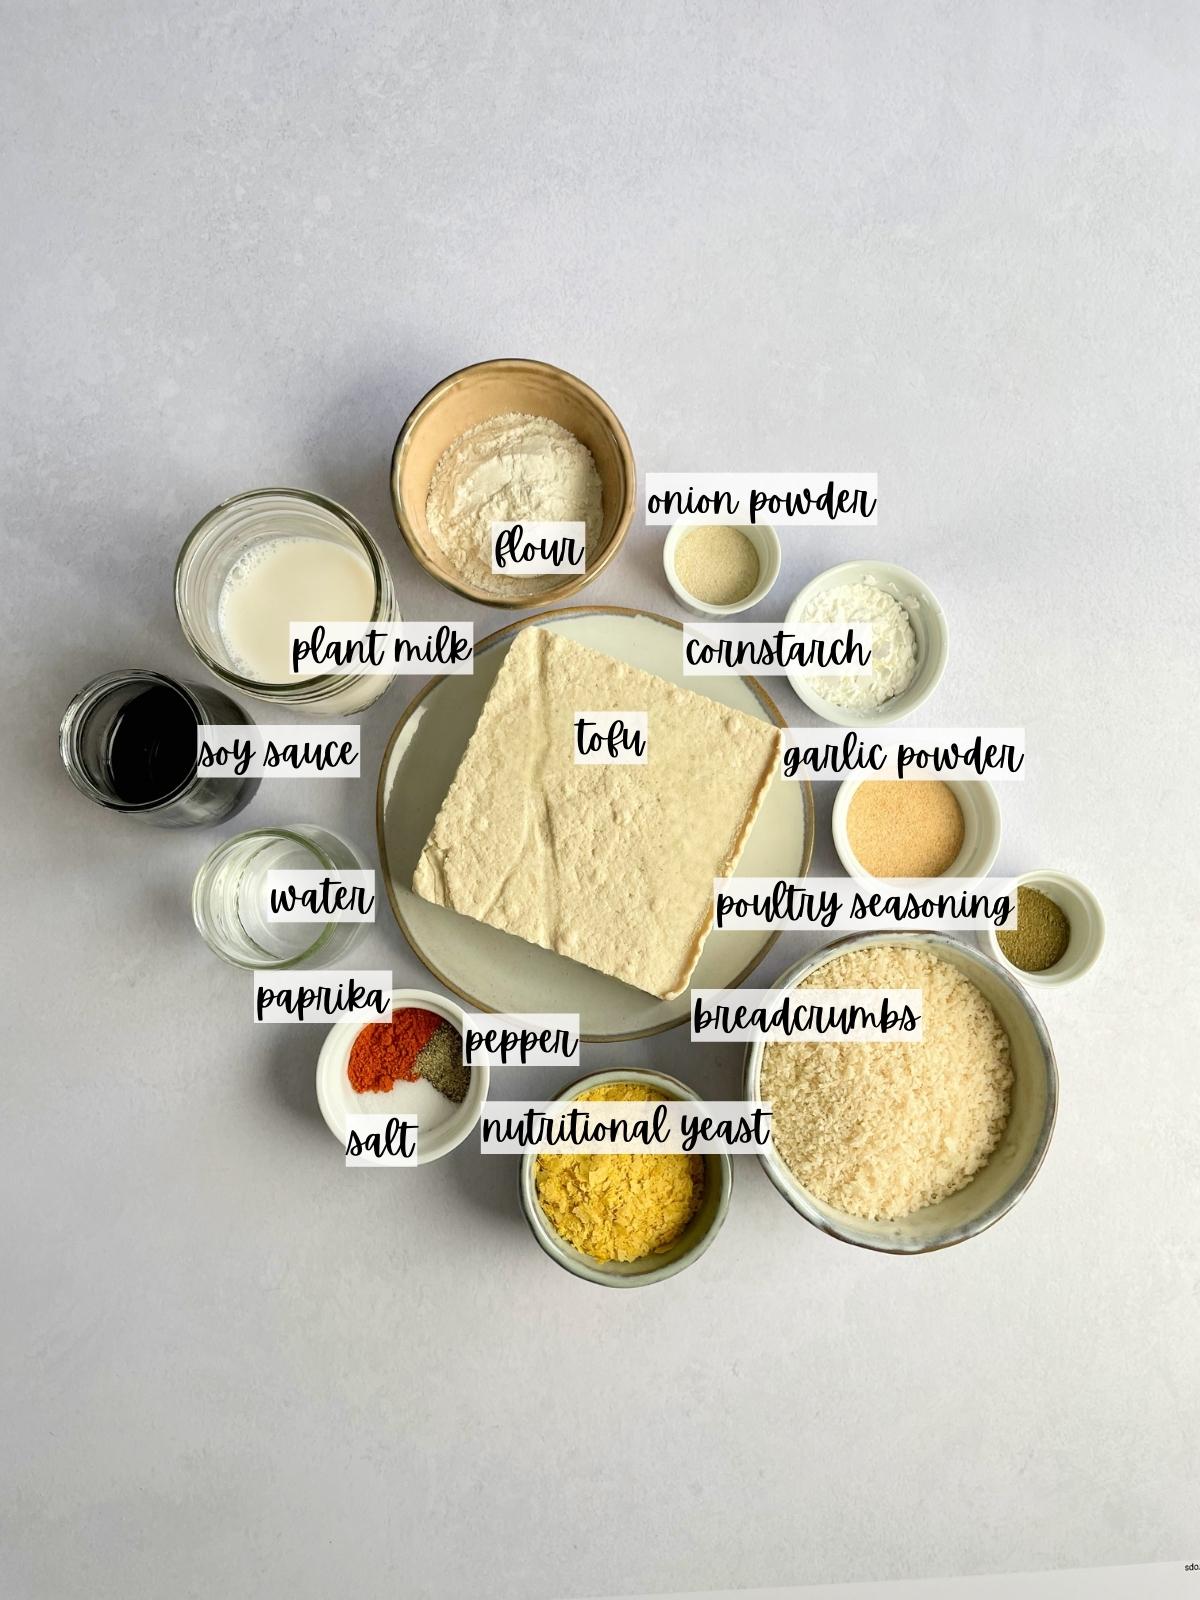 Labeled ingredients for tofu nuggets.